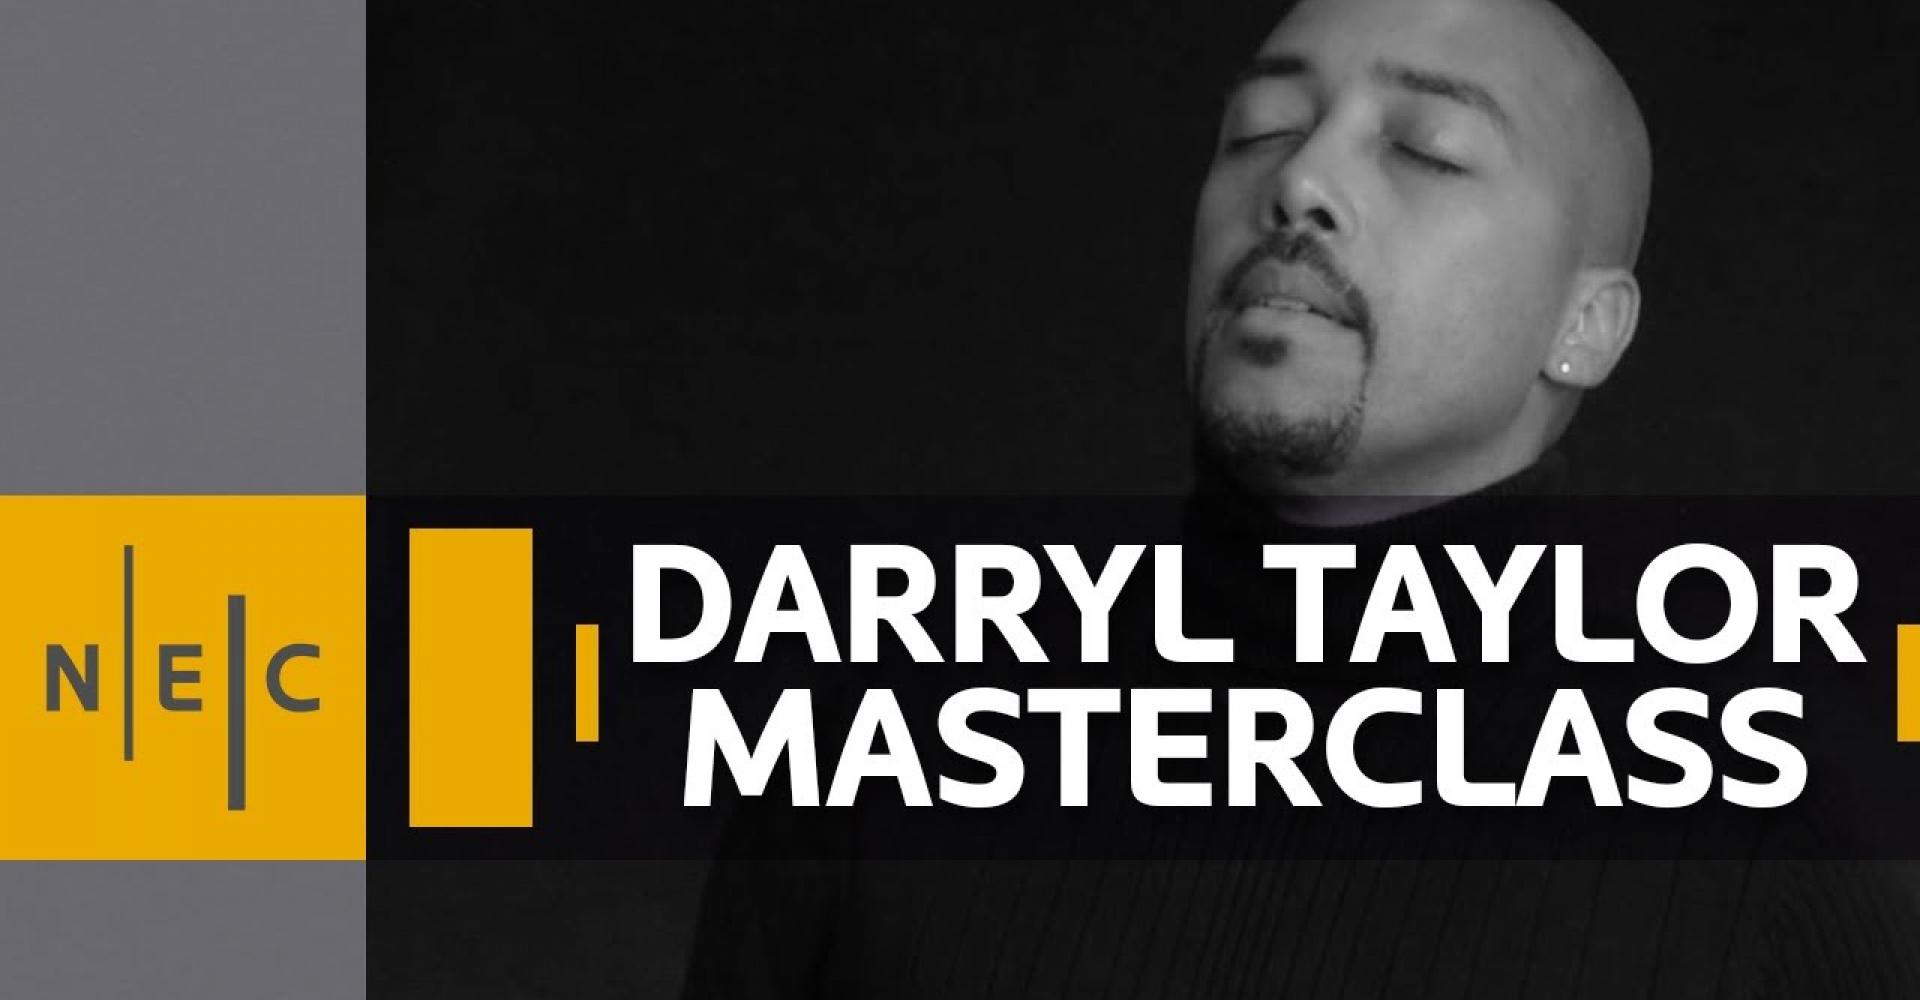 Text: "Darryl Taylor Masterclass" with a picture of Taylor closing his eyes and singing